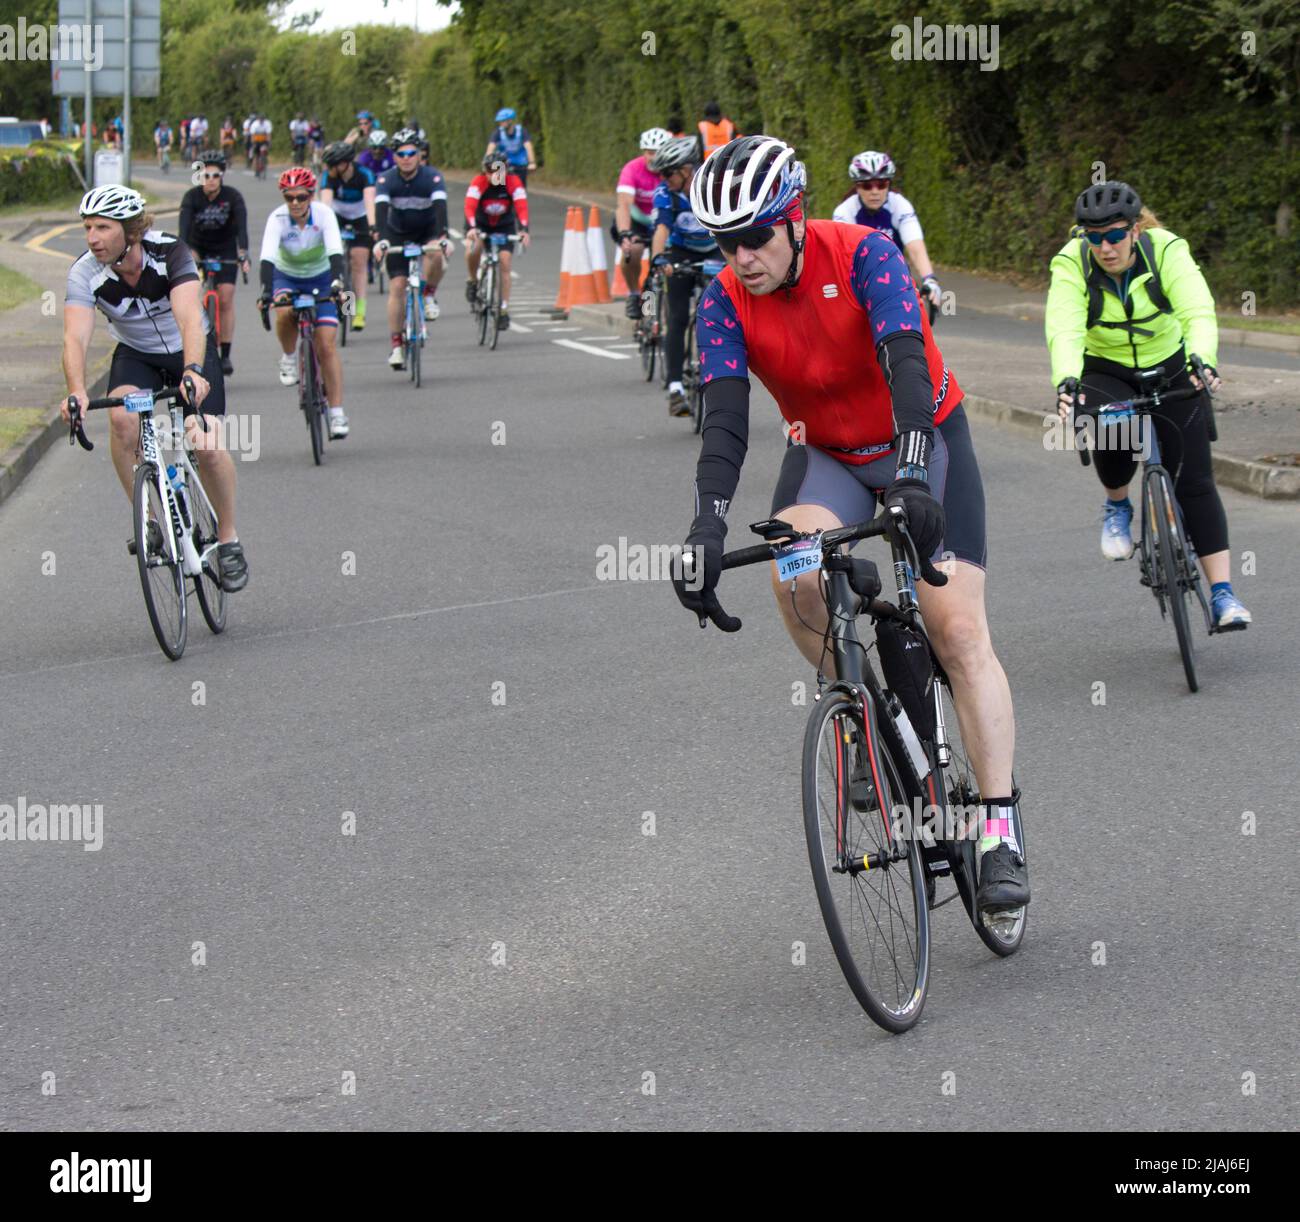 Participants concurrents RideLondon Charity Cycling Event Fyfield Essex Banque D'Images